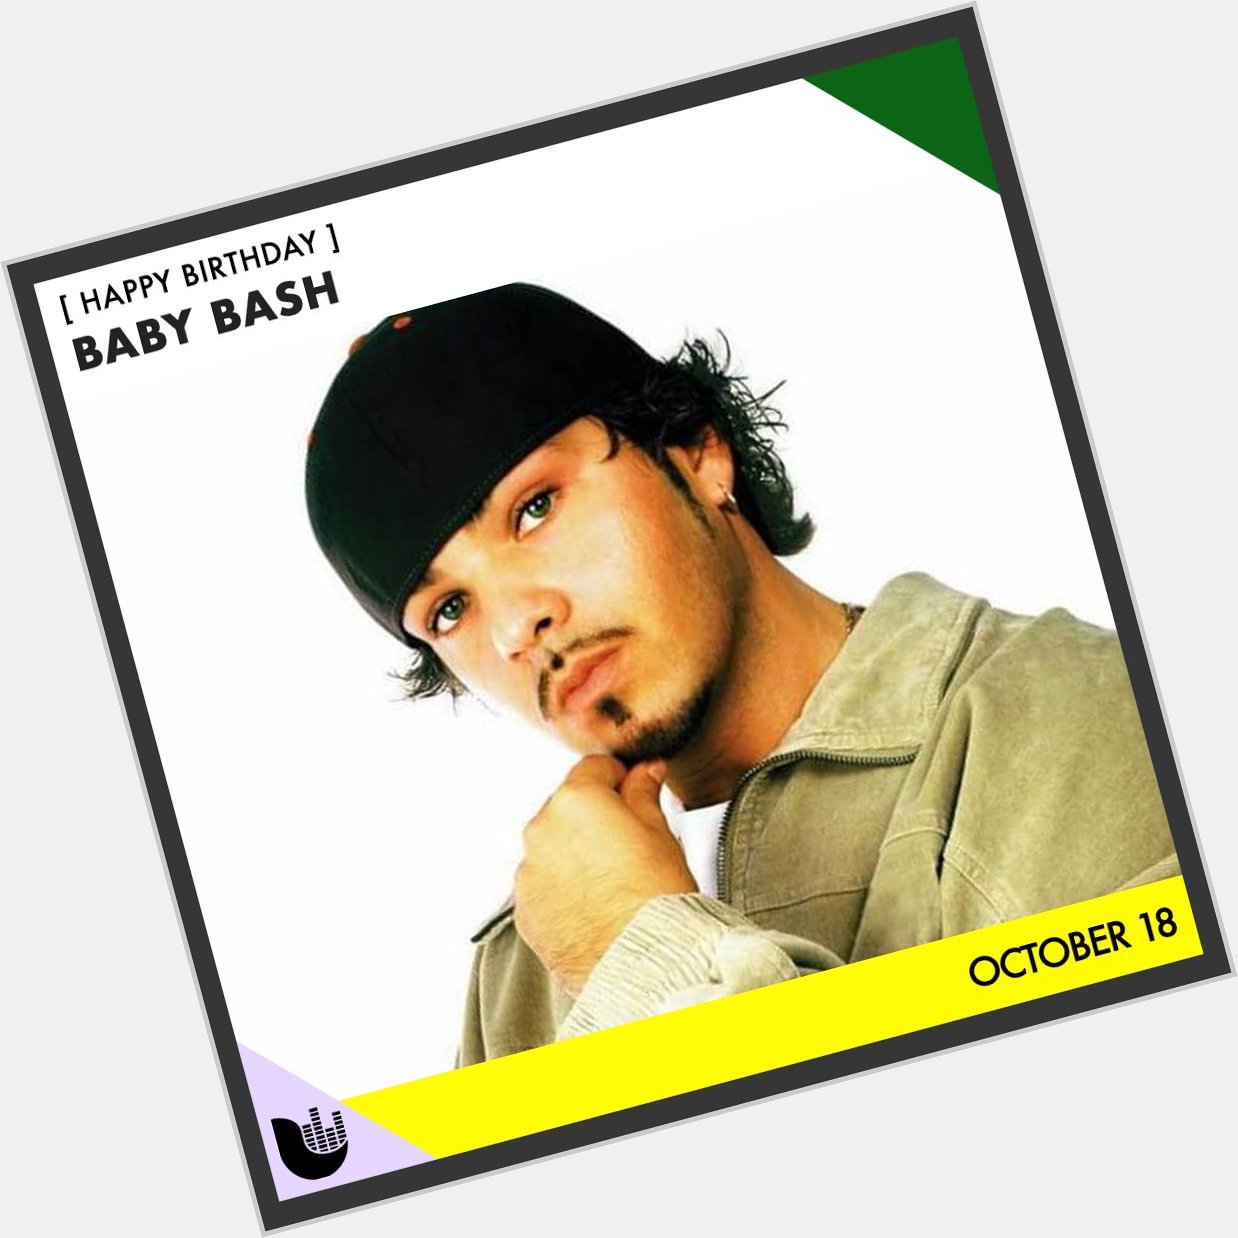 Join us in wishing a happy birthday to Baby Bash! 